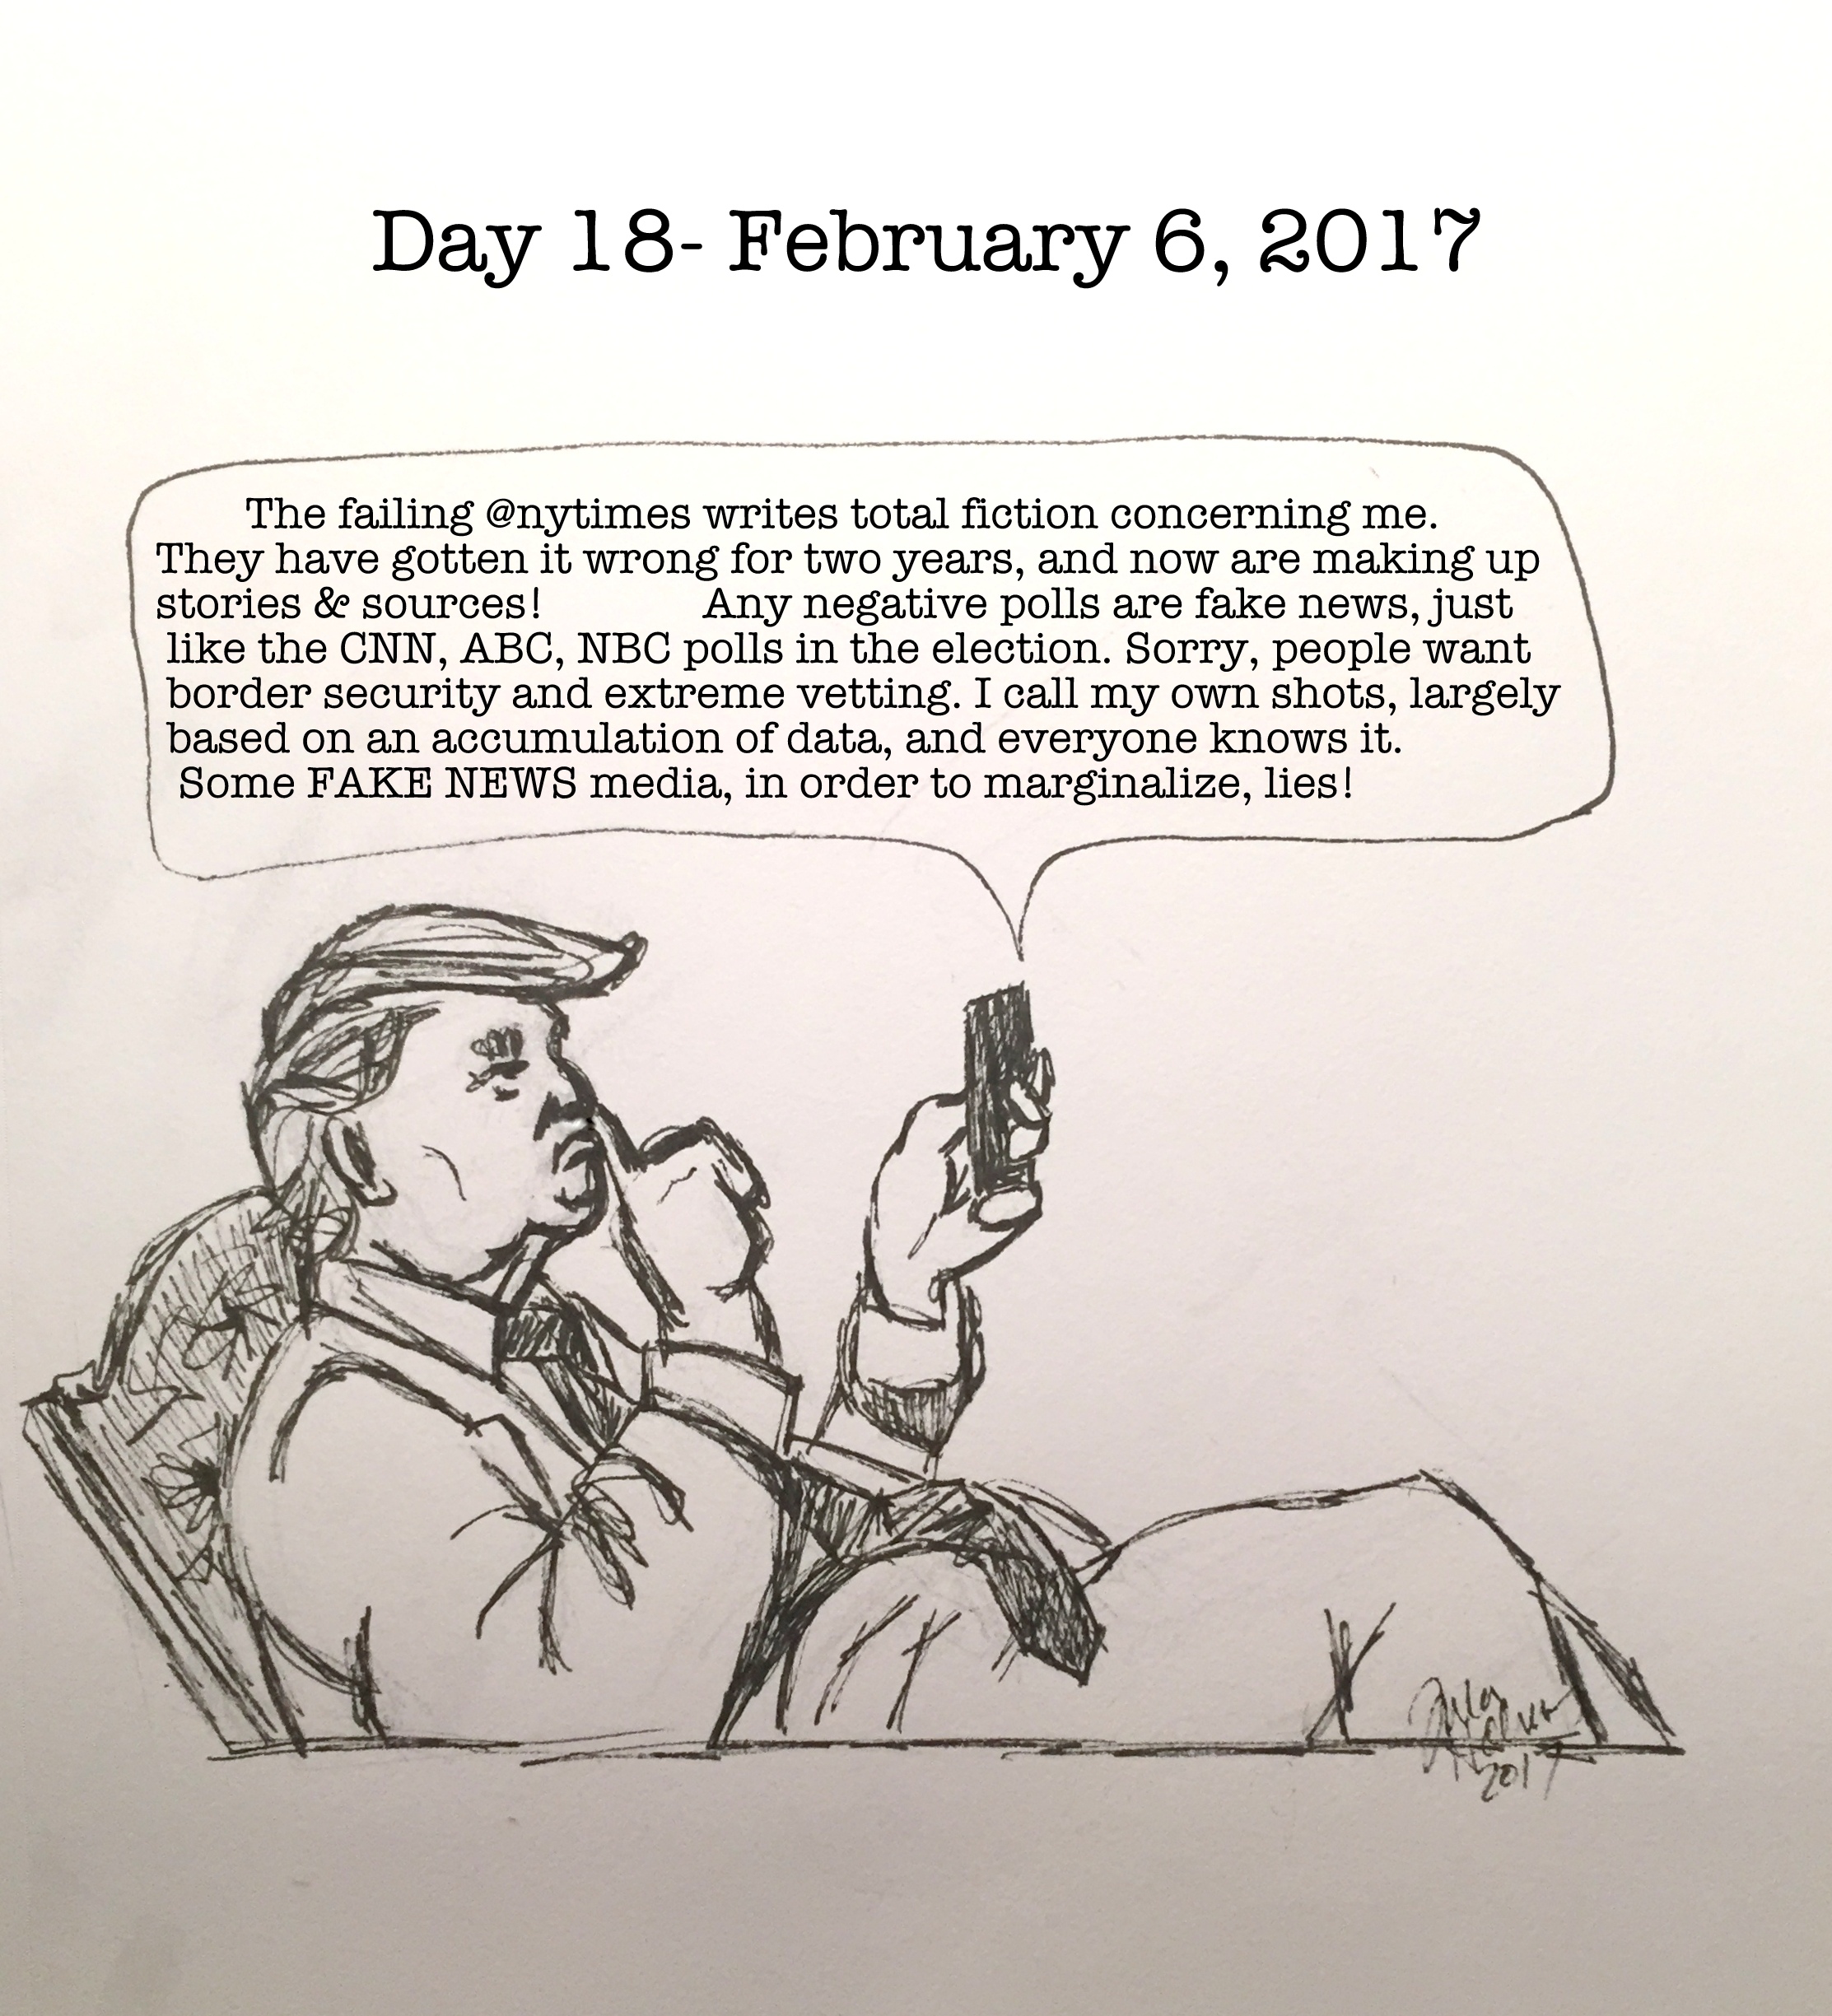 Day 18- February 6, 2017- Copyright 2017